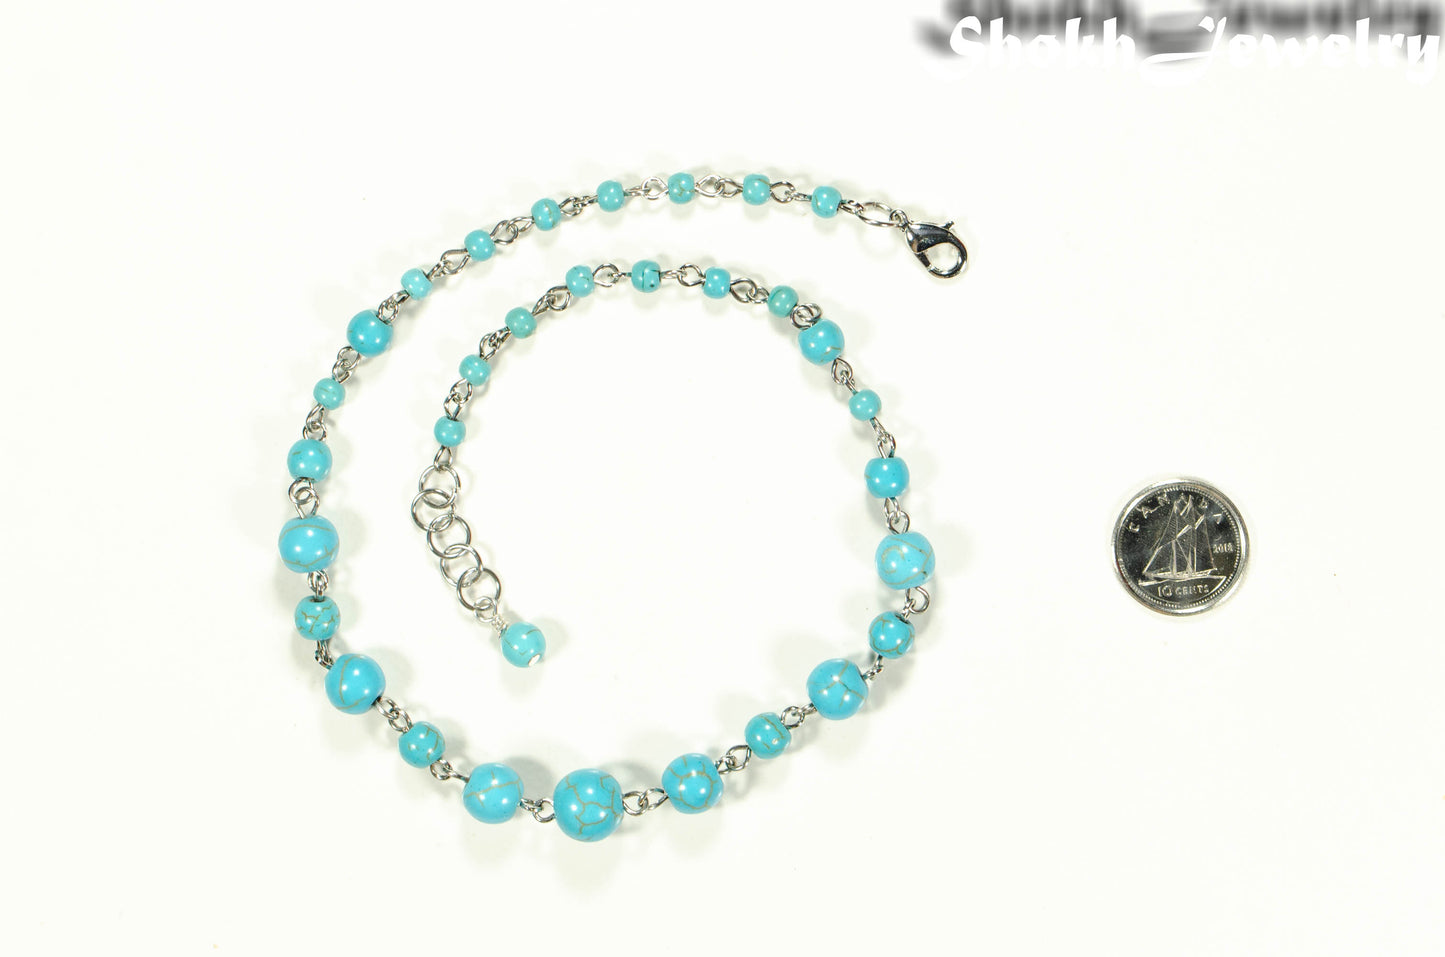 Handmade Turquoise Howlite Link Chain Anklet beside a dime.